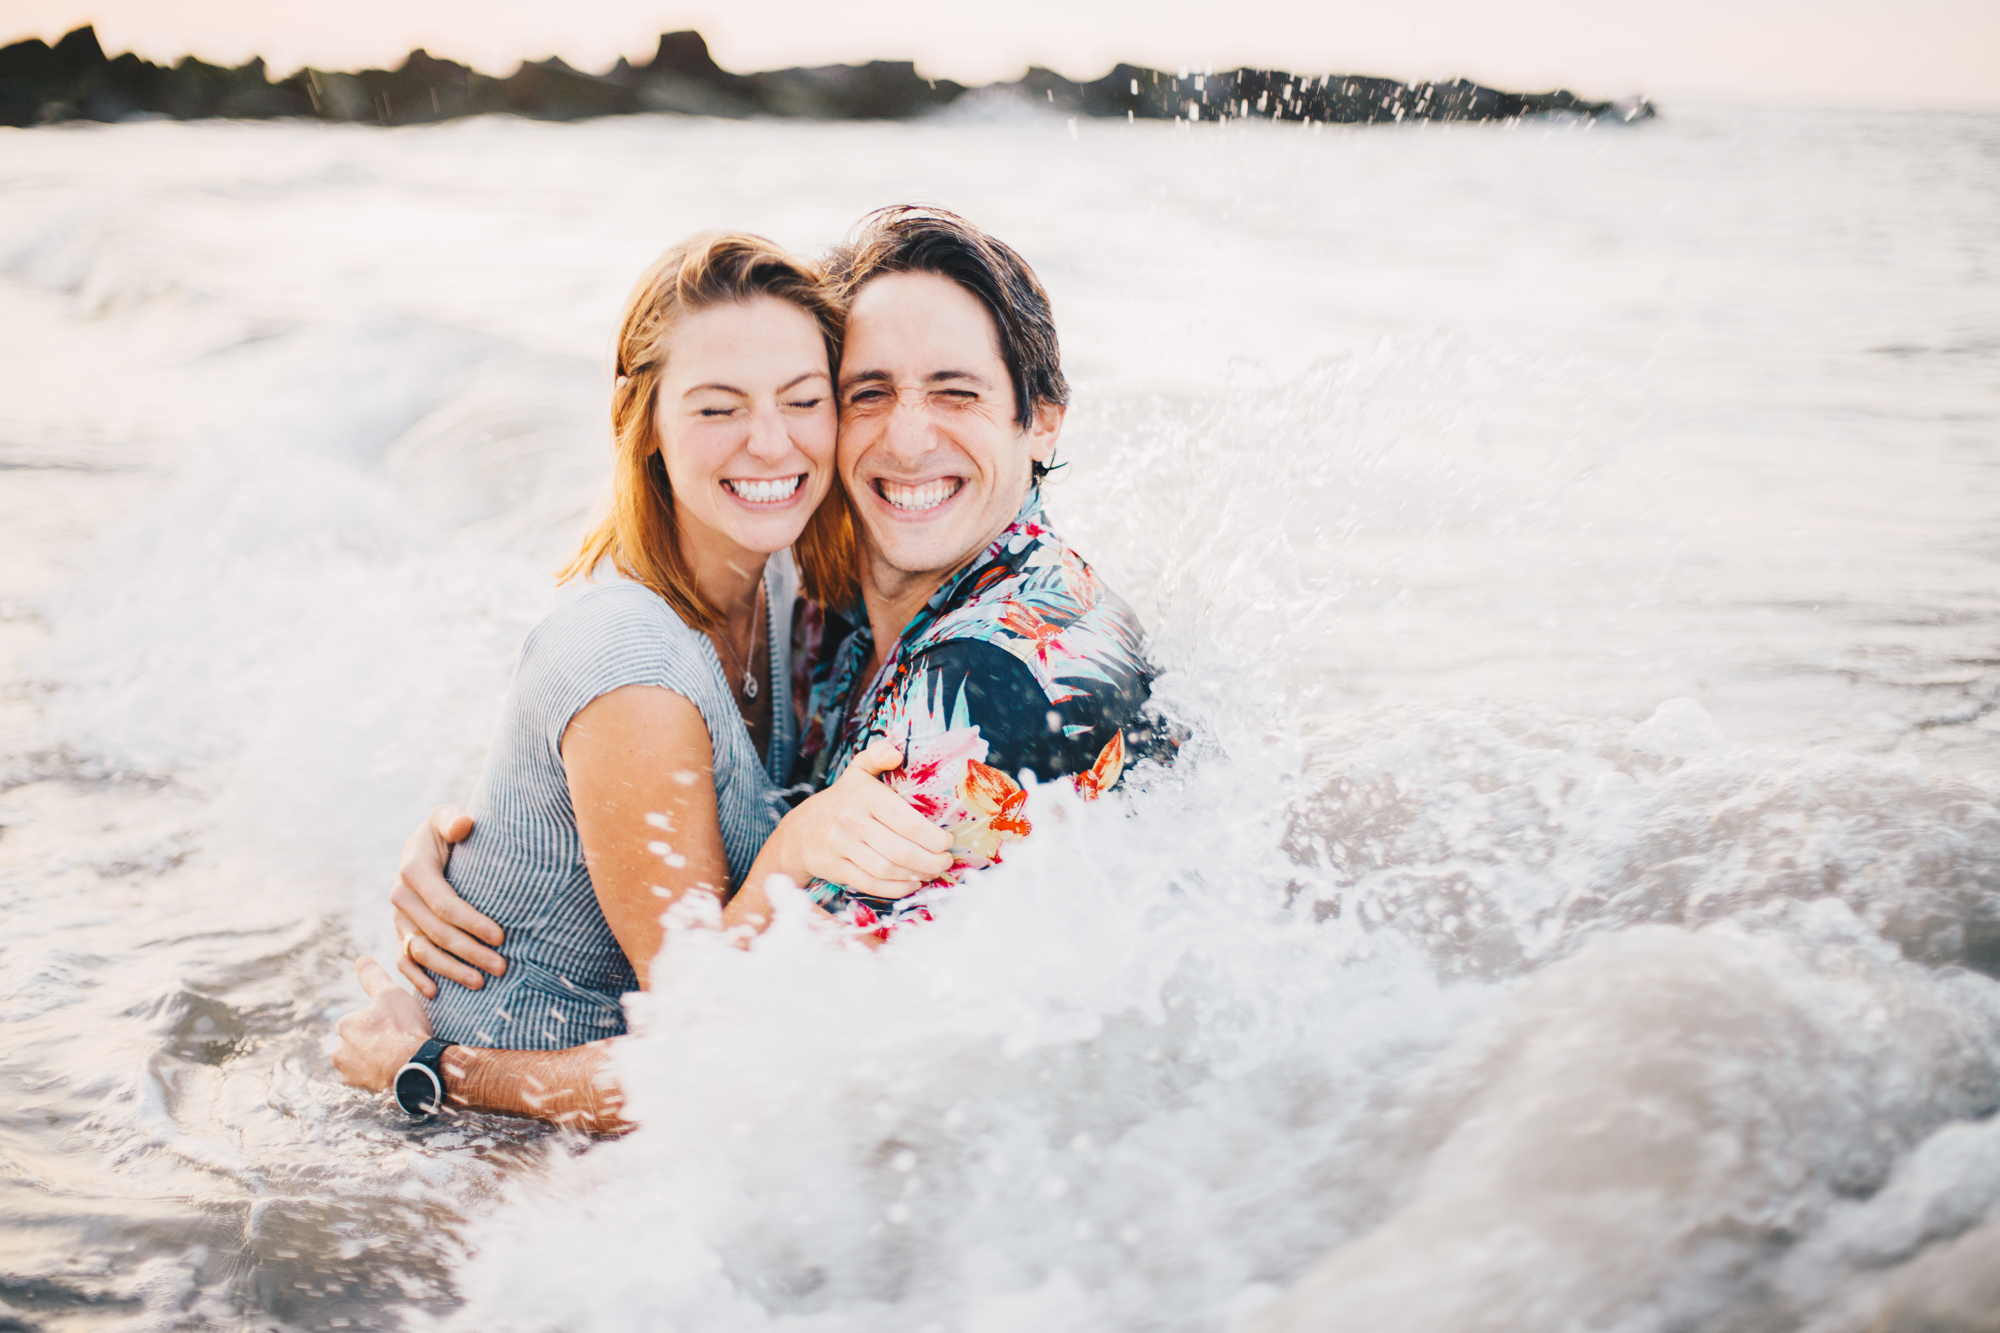 Perfect Sunrise Engagement Photos on the Beach at Coney Island